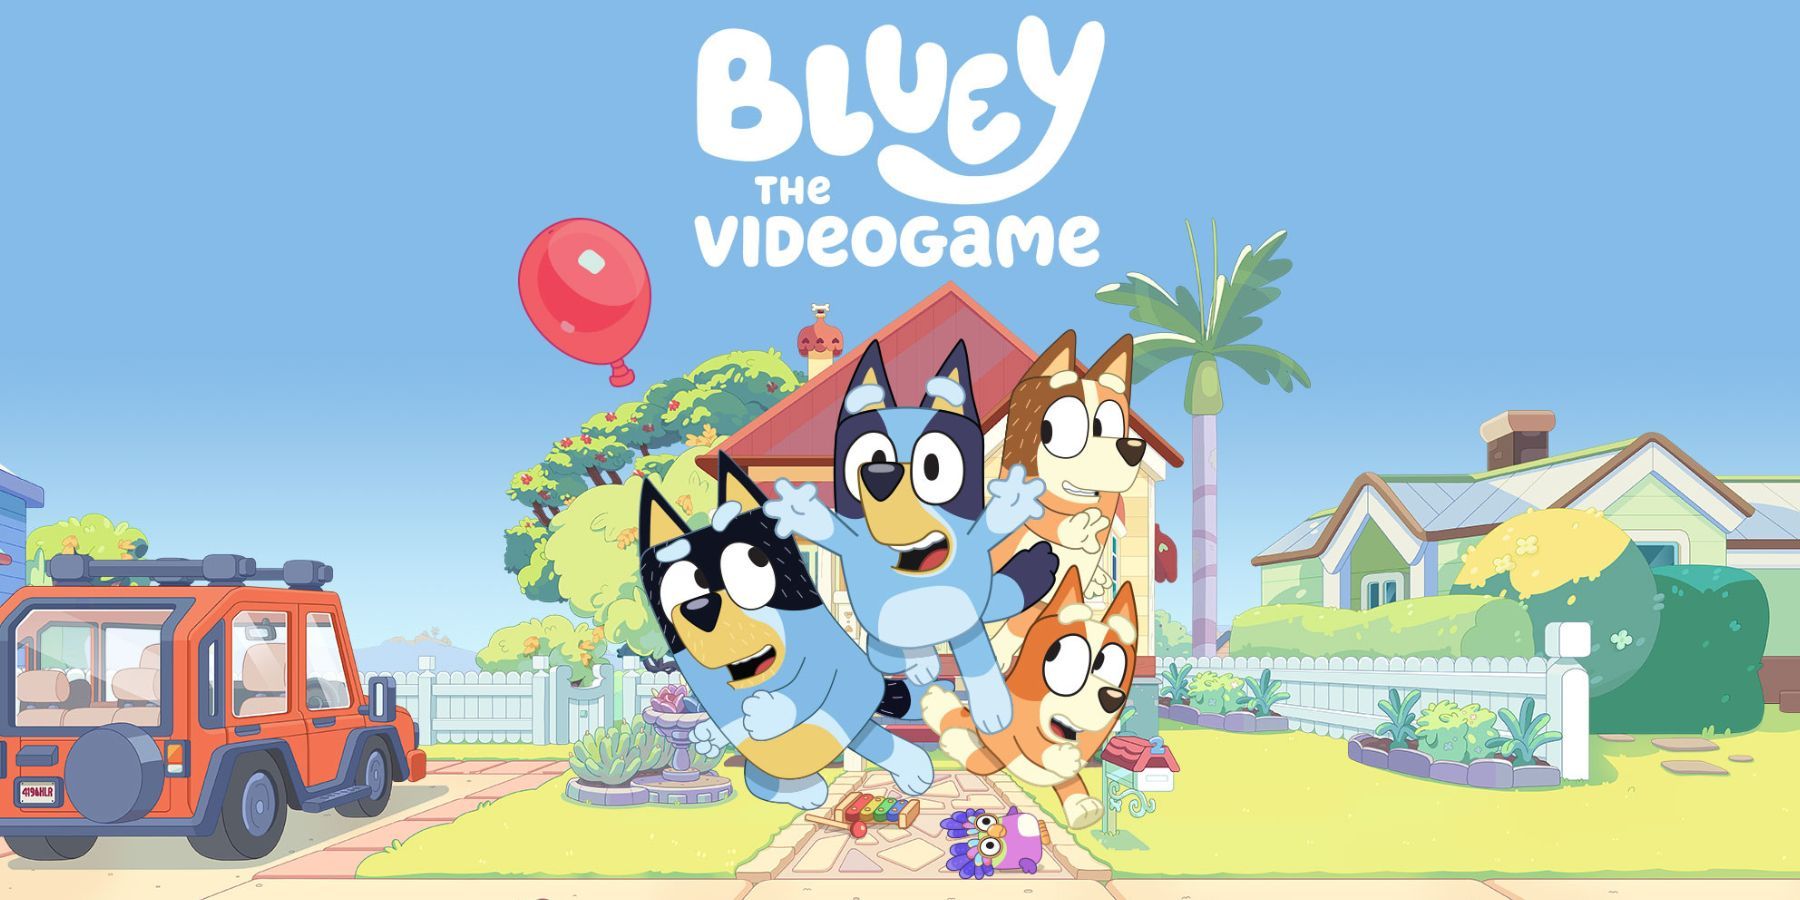 bluey the videogame cover art.